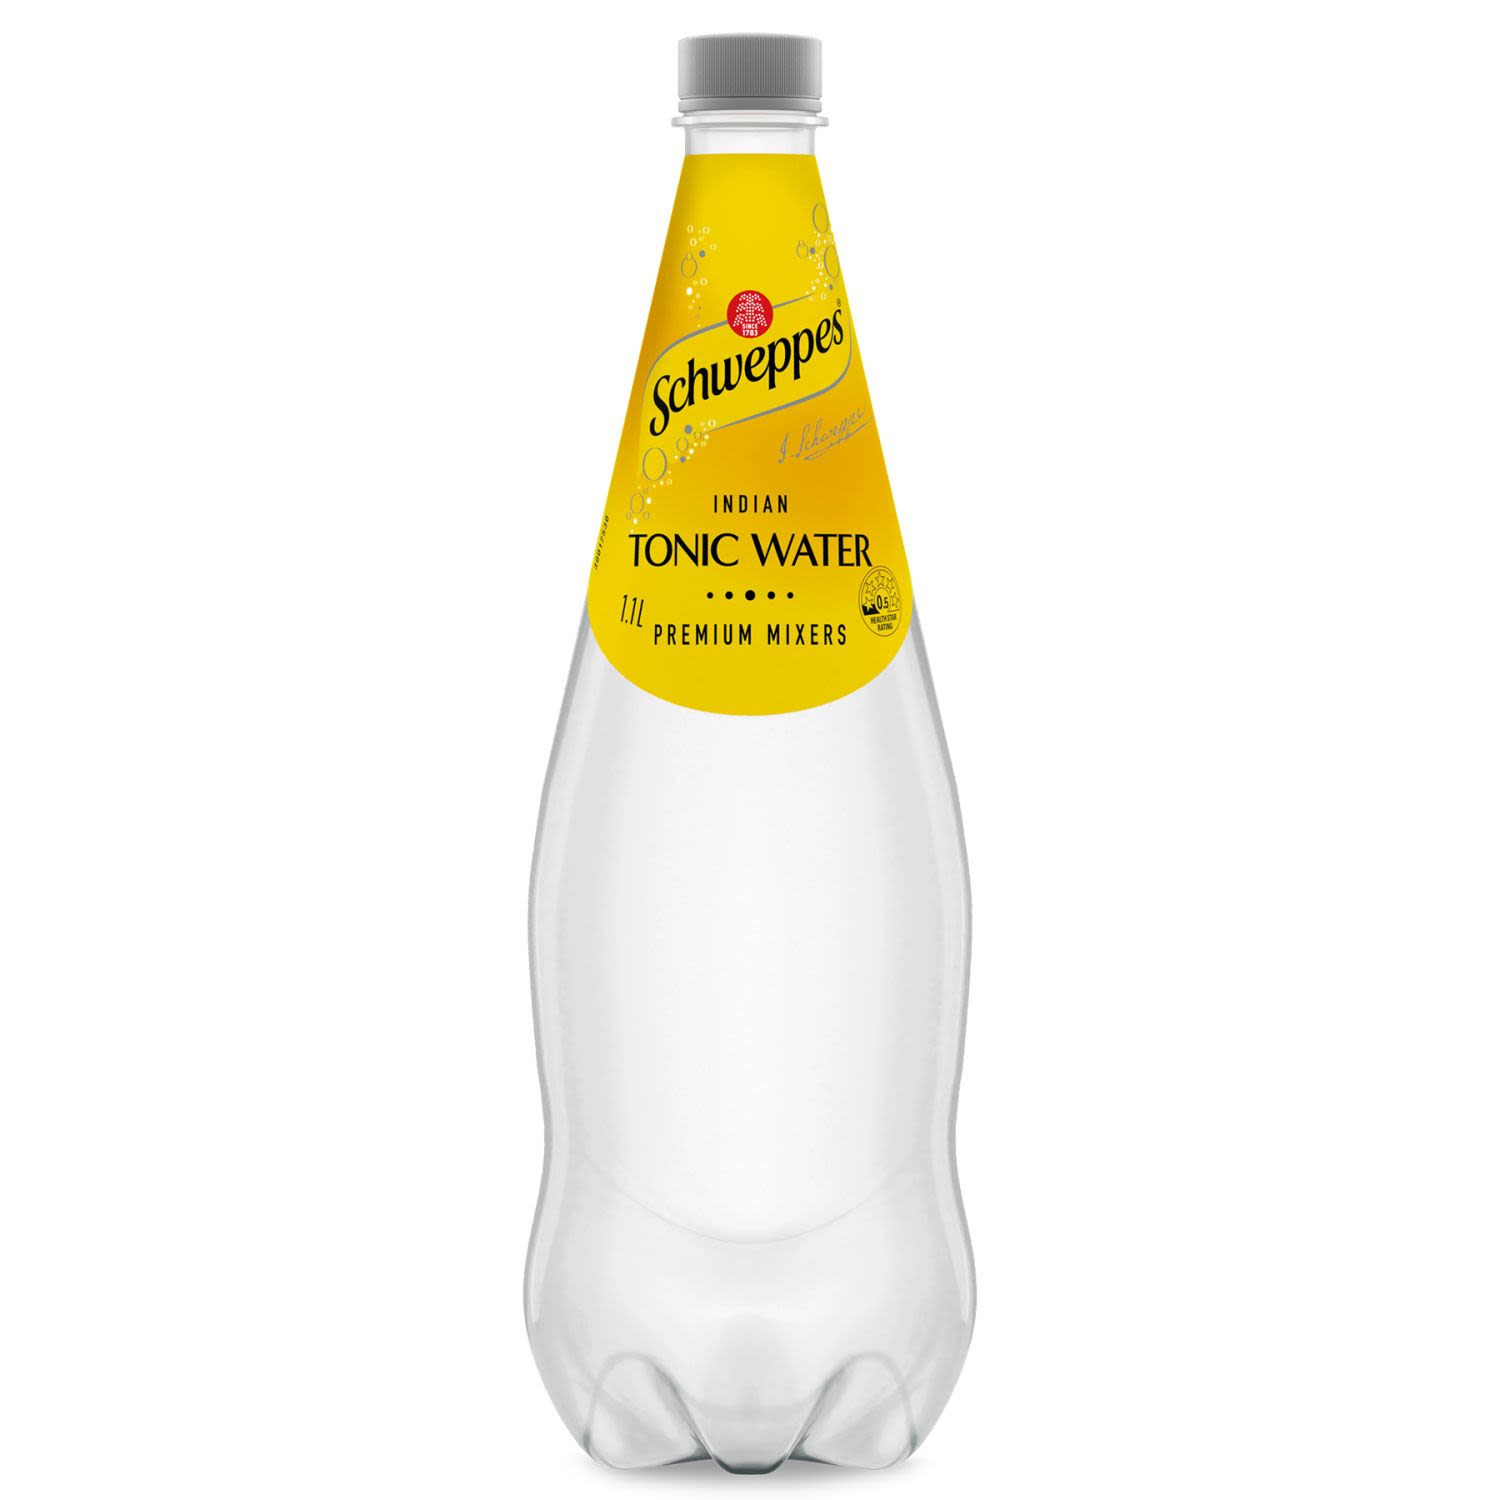 Schweppes Classic Mixers Indian Tonic Water, 1.1 Litre